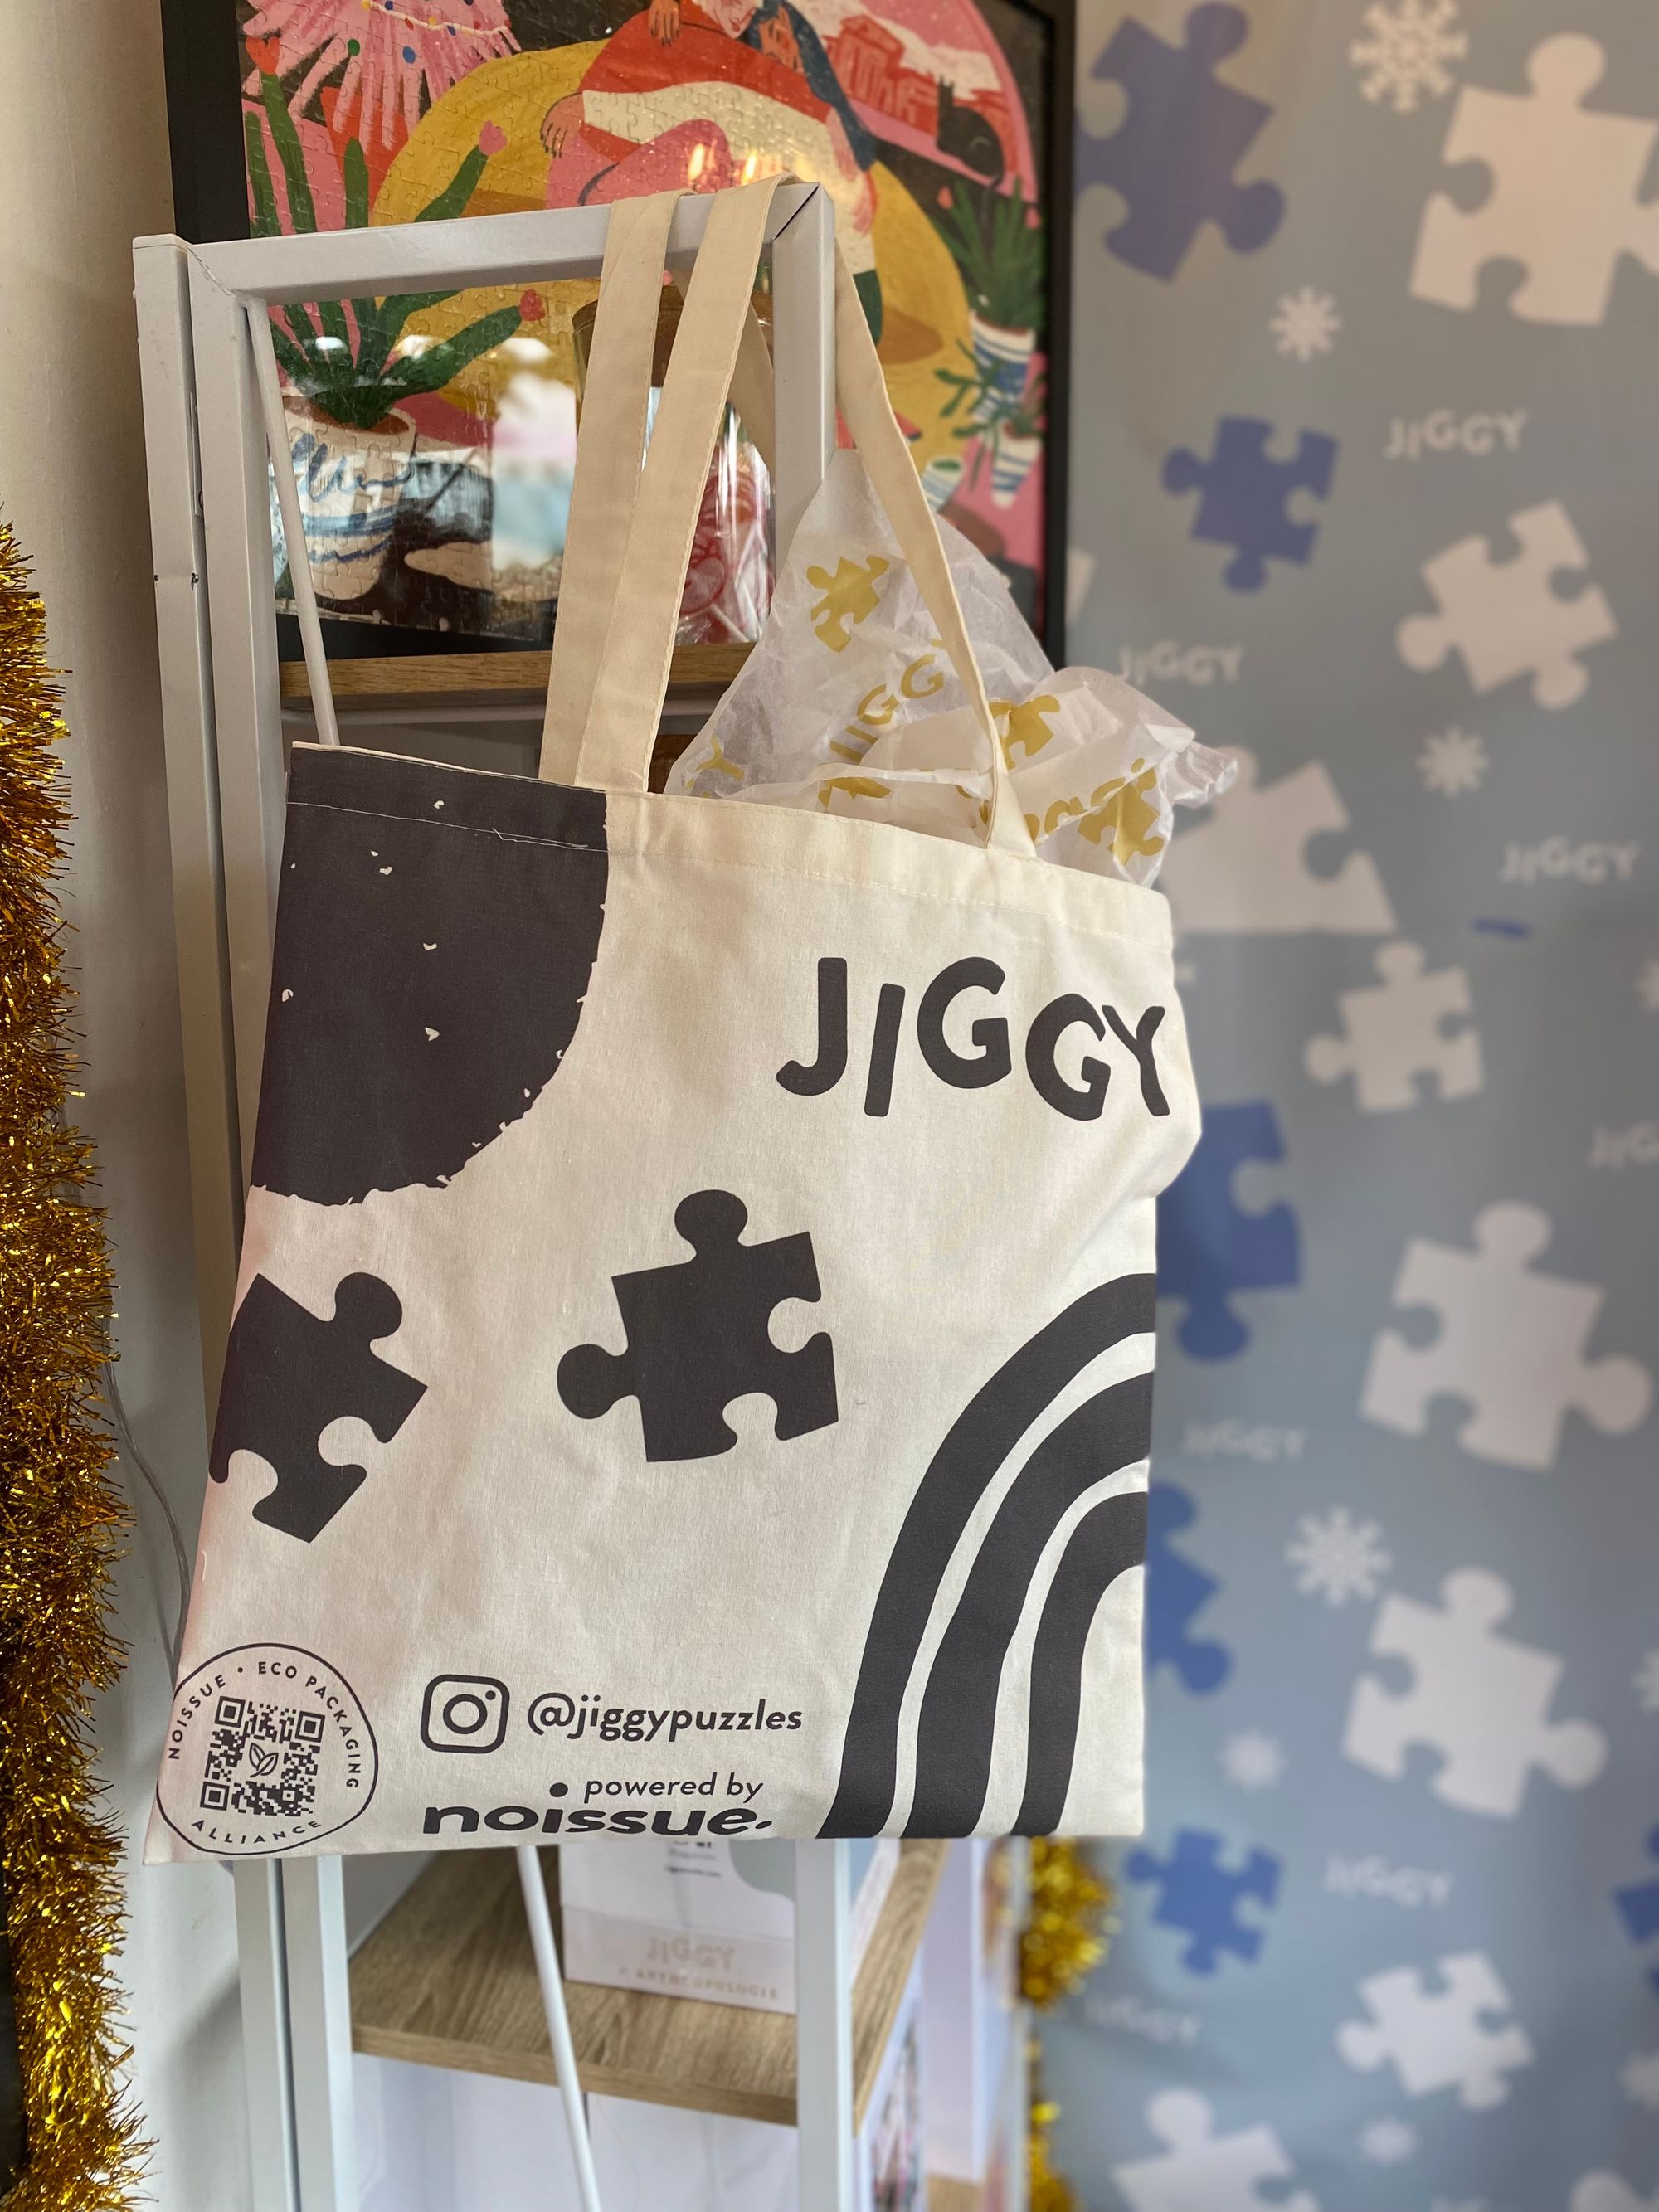 JIGGY and noissue Bring Their Holiday Shopping Experience to Life at NYC Holiday Pop-Up